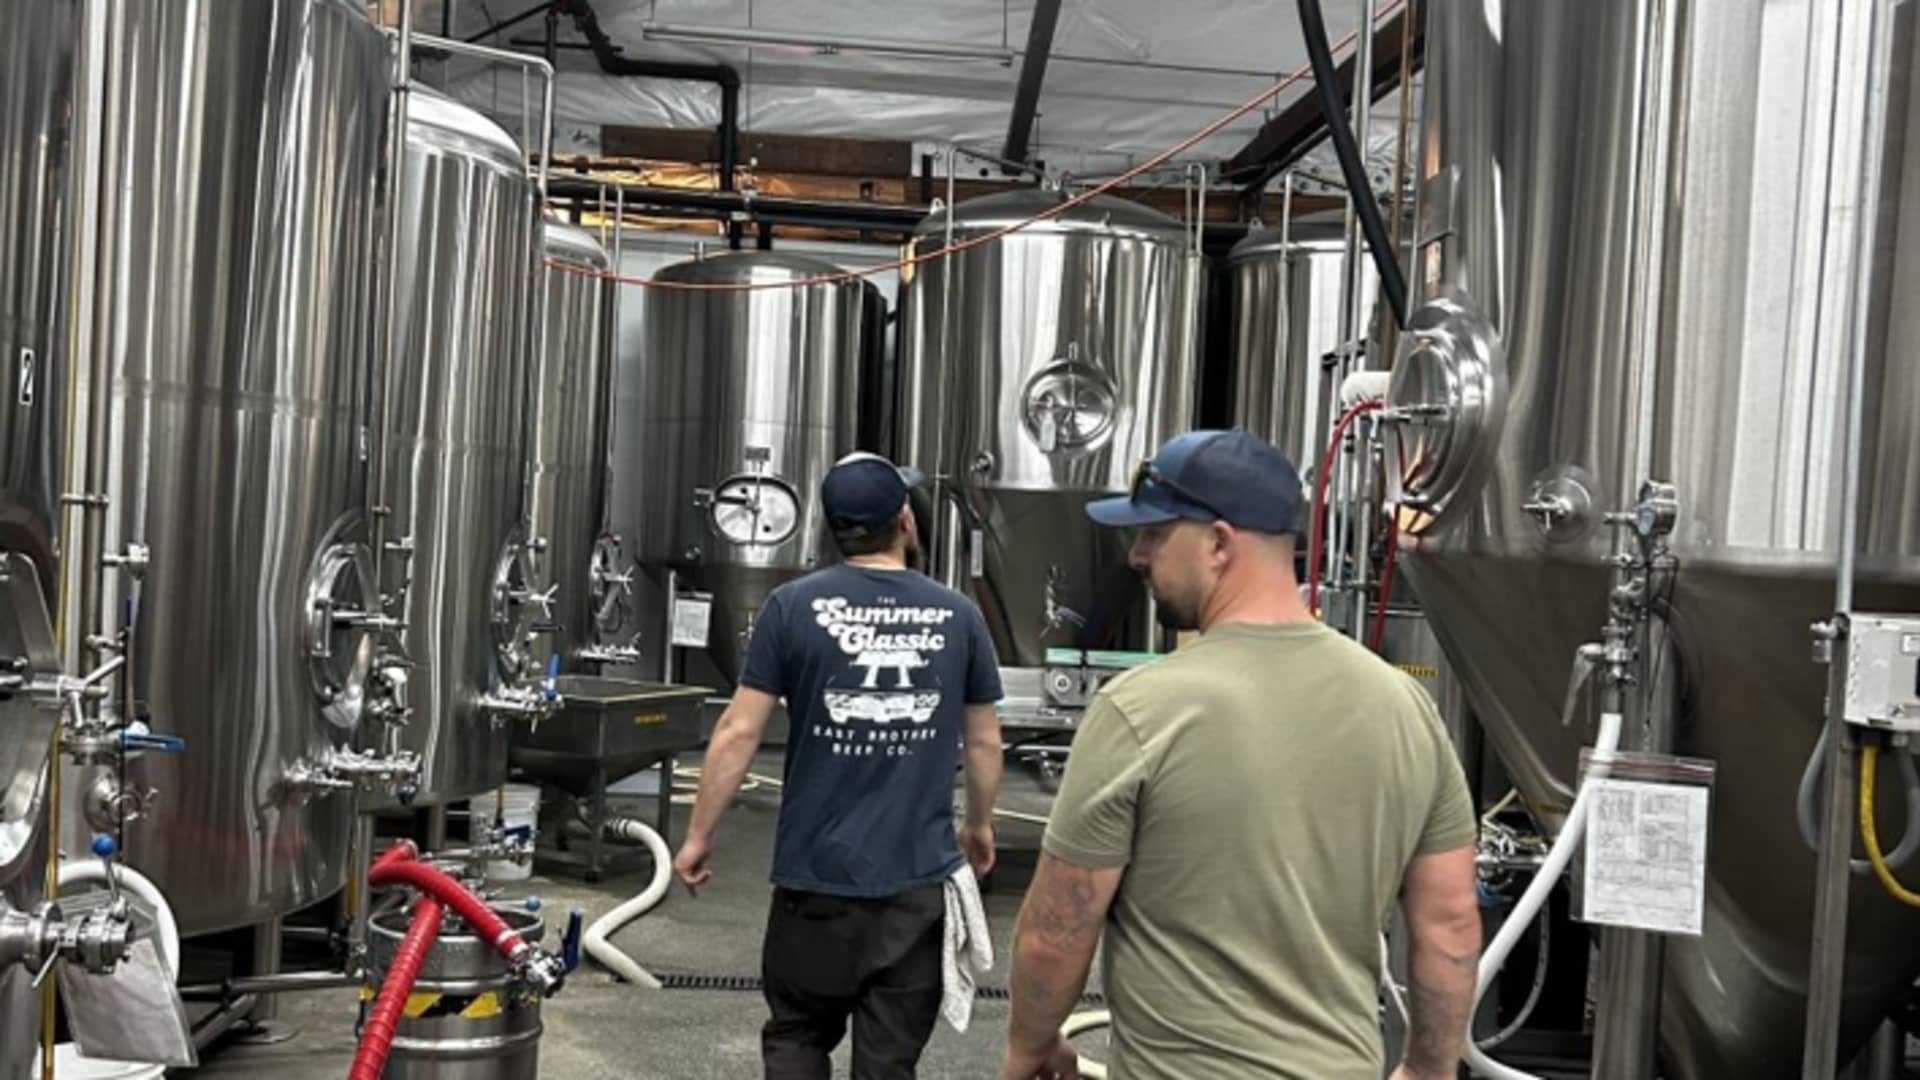 Epic Cleantec employees touring Devil's Canyon Brewing Company.